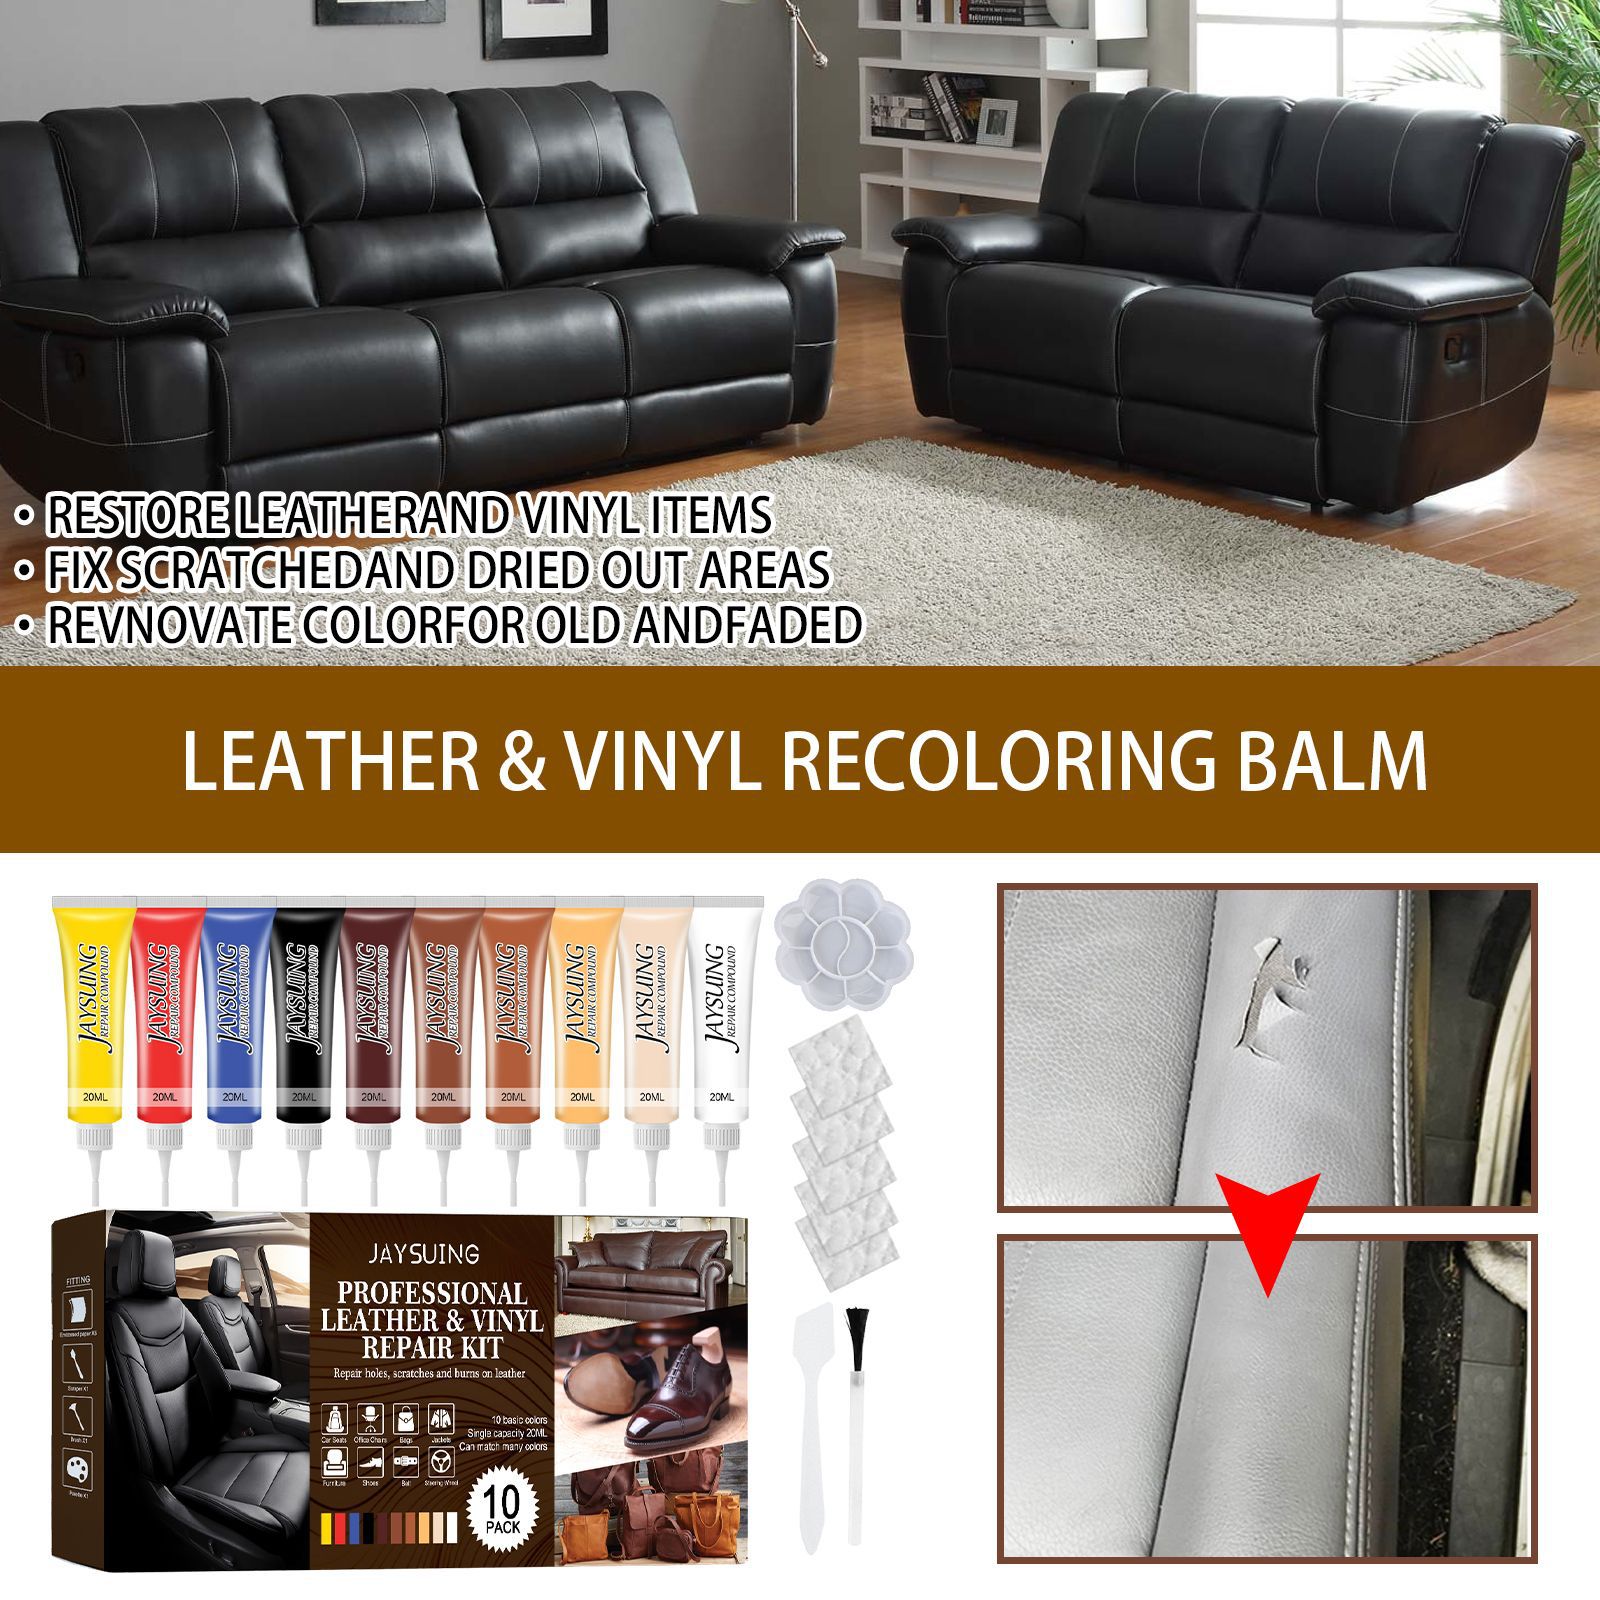 Leather Repair Kits for Couches Dark Brown, Leather Repair Kit for Couch  Leather Refurbishing - Leather Restorer Vinyl Repair Kit - Leather Scratch  Repair for Couch, Boat Seats - Leather Dye Brown 